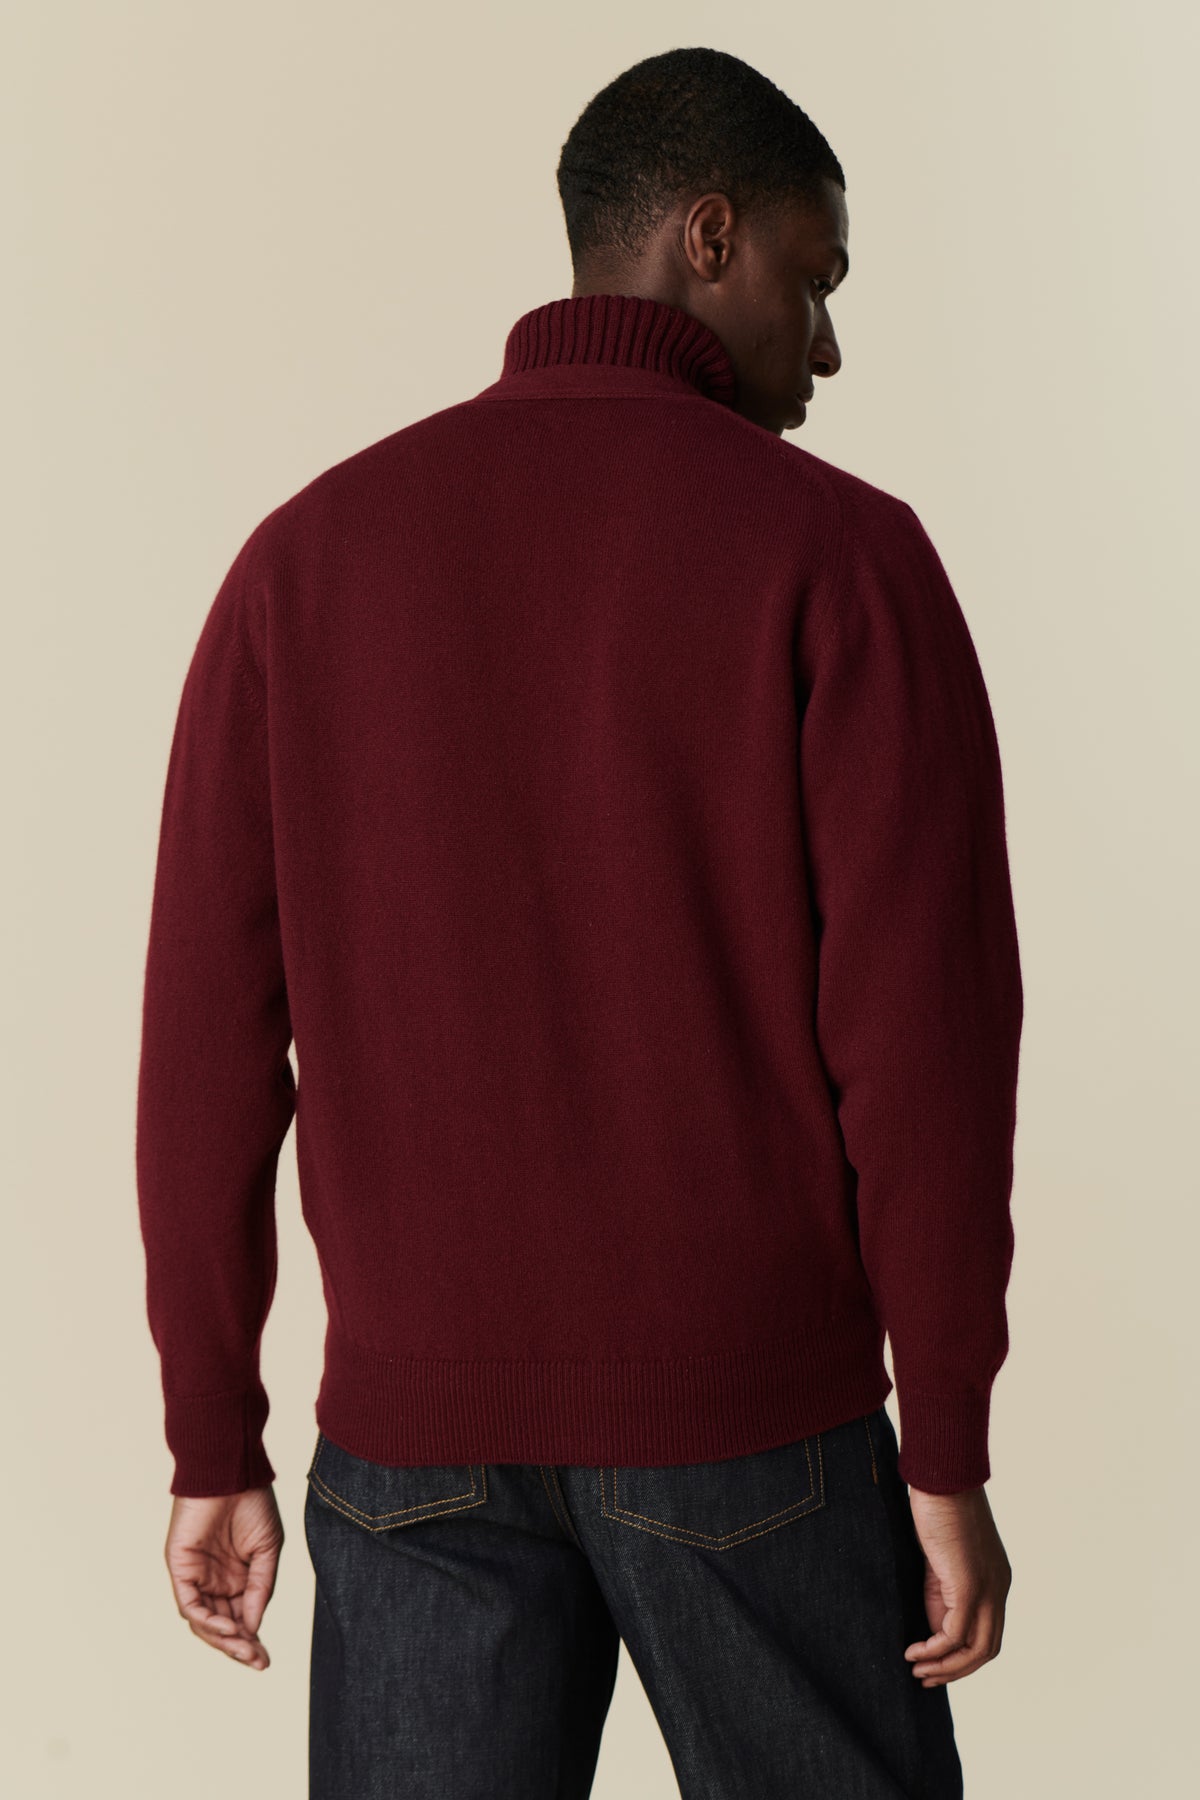 
            Image of back of male wearing lambswool cardigan in burgundy